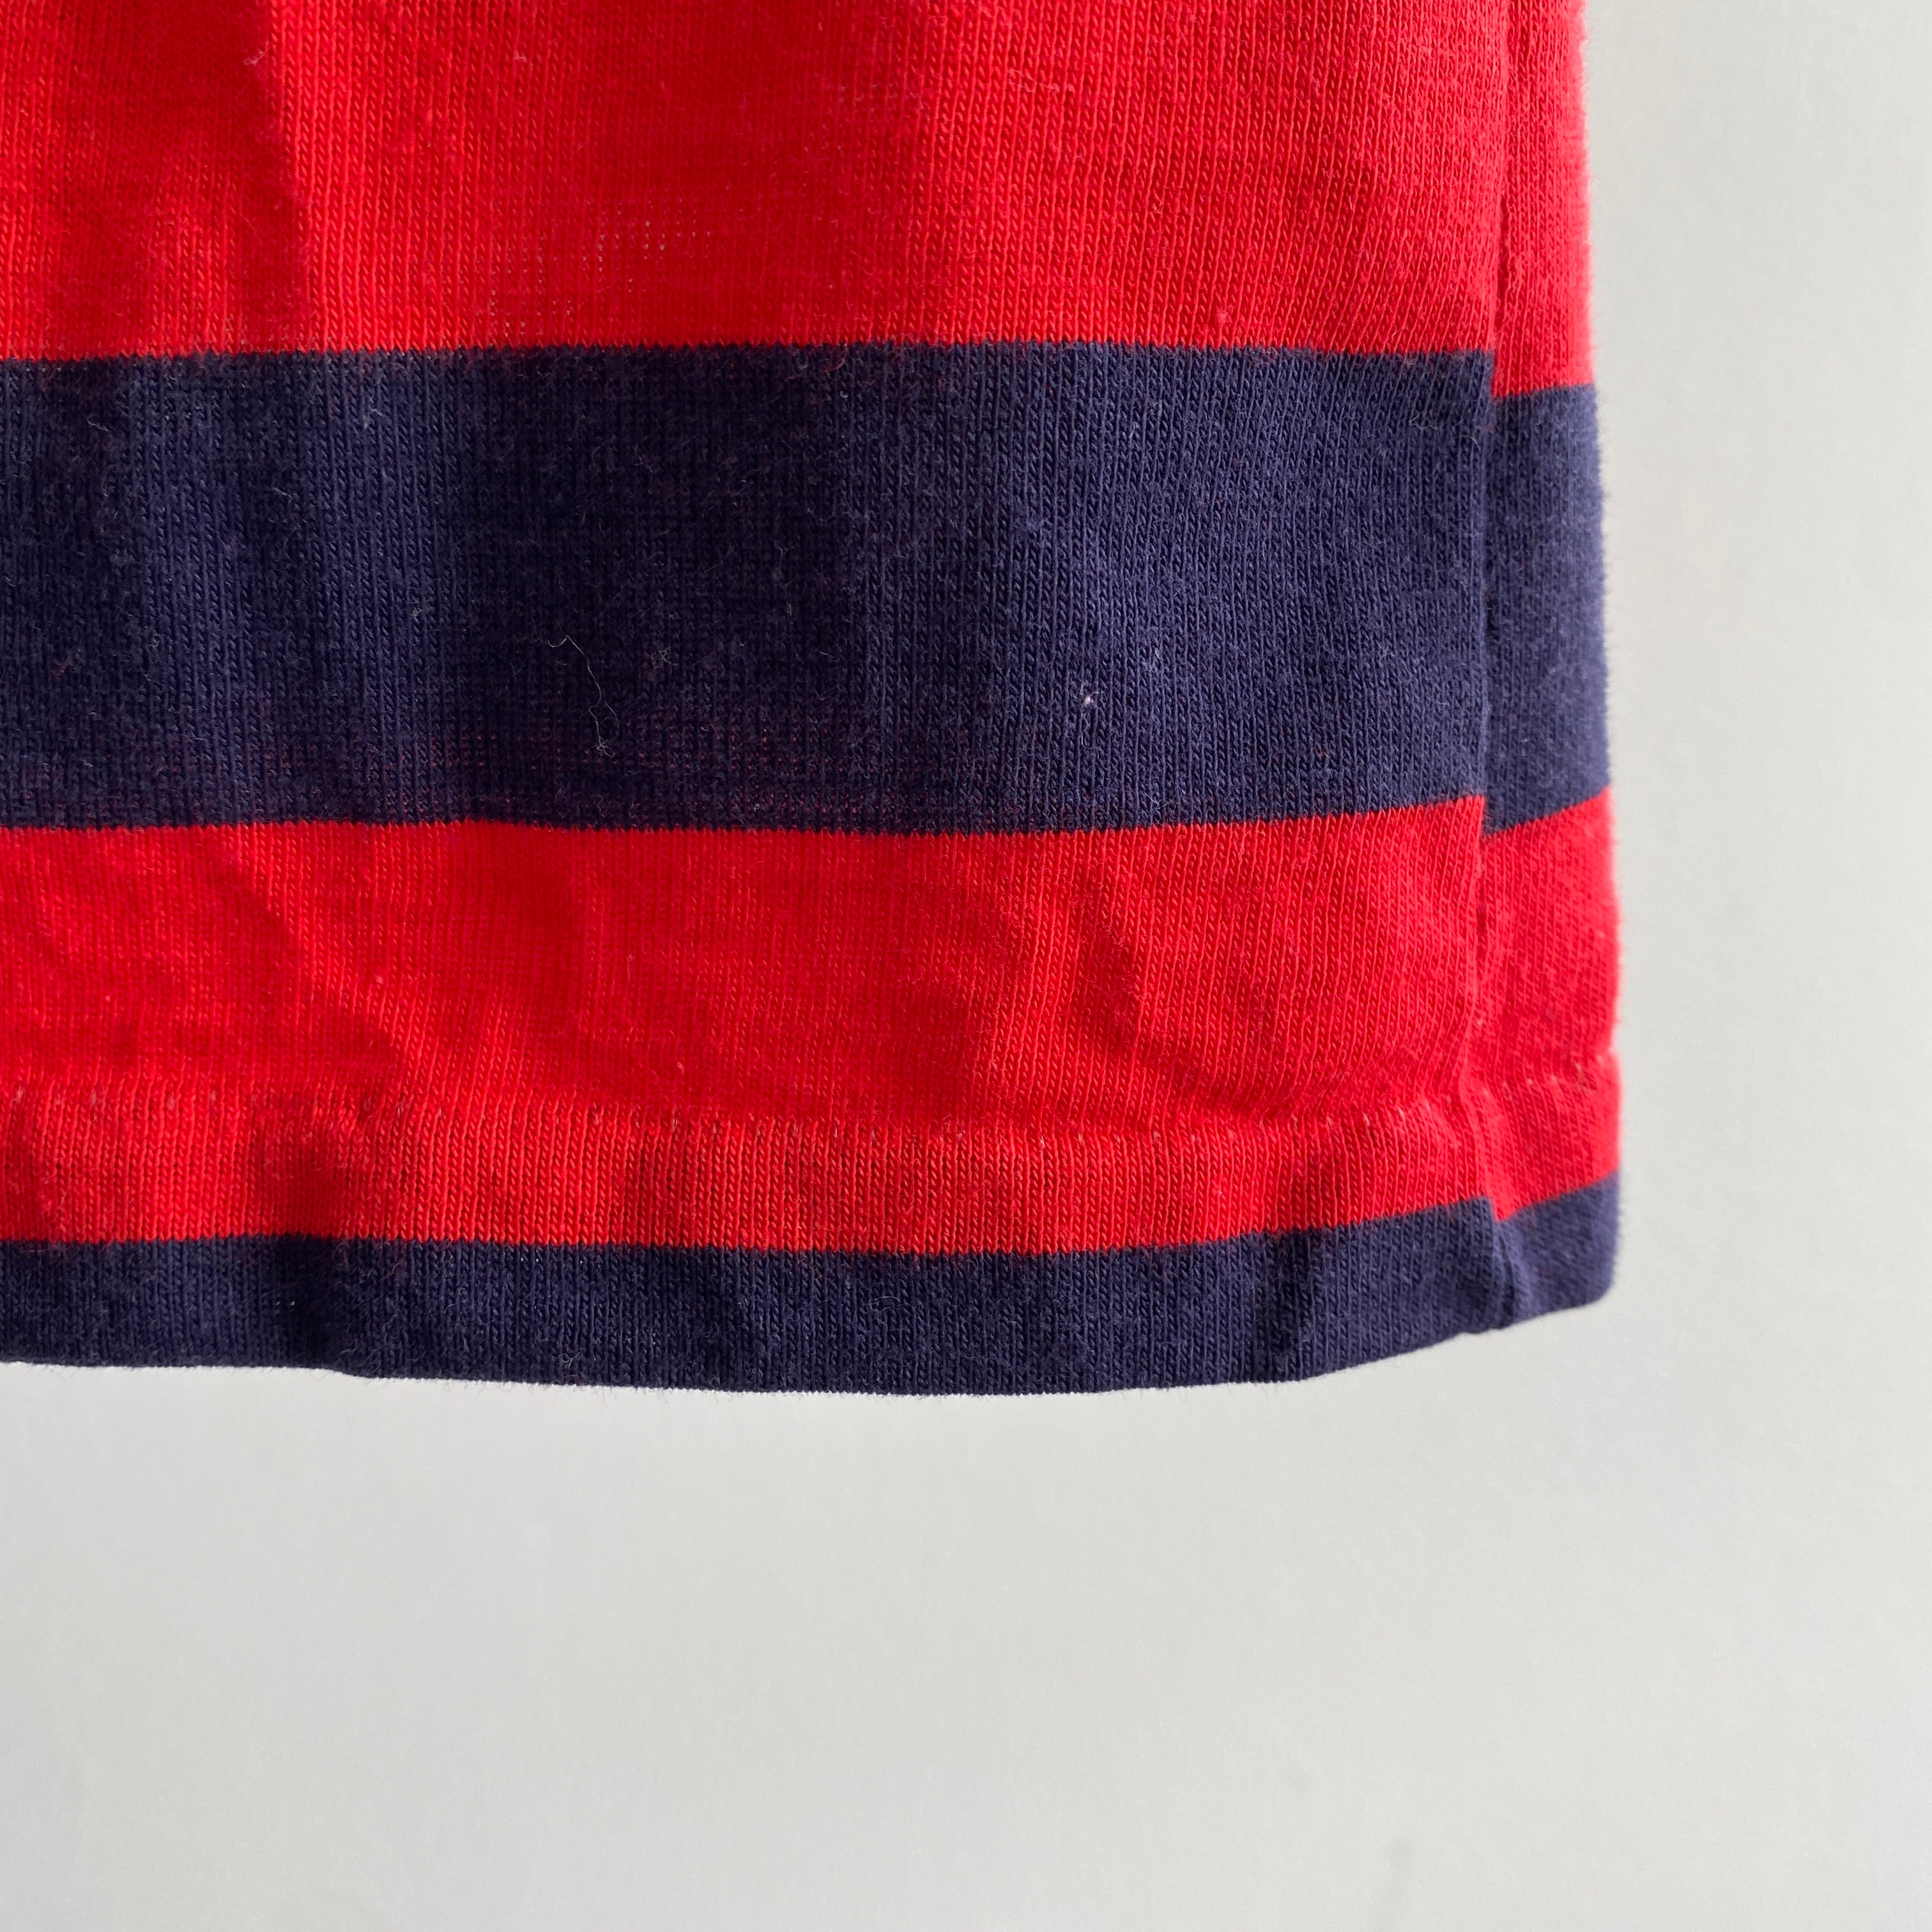 1970/80s ESPRIT Navy and Red Striped Polo T-Shirt